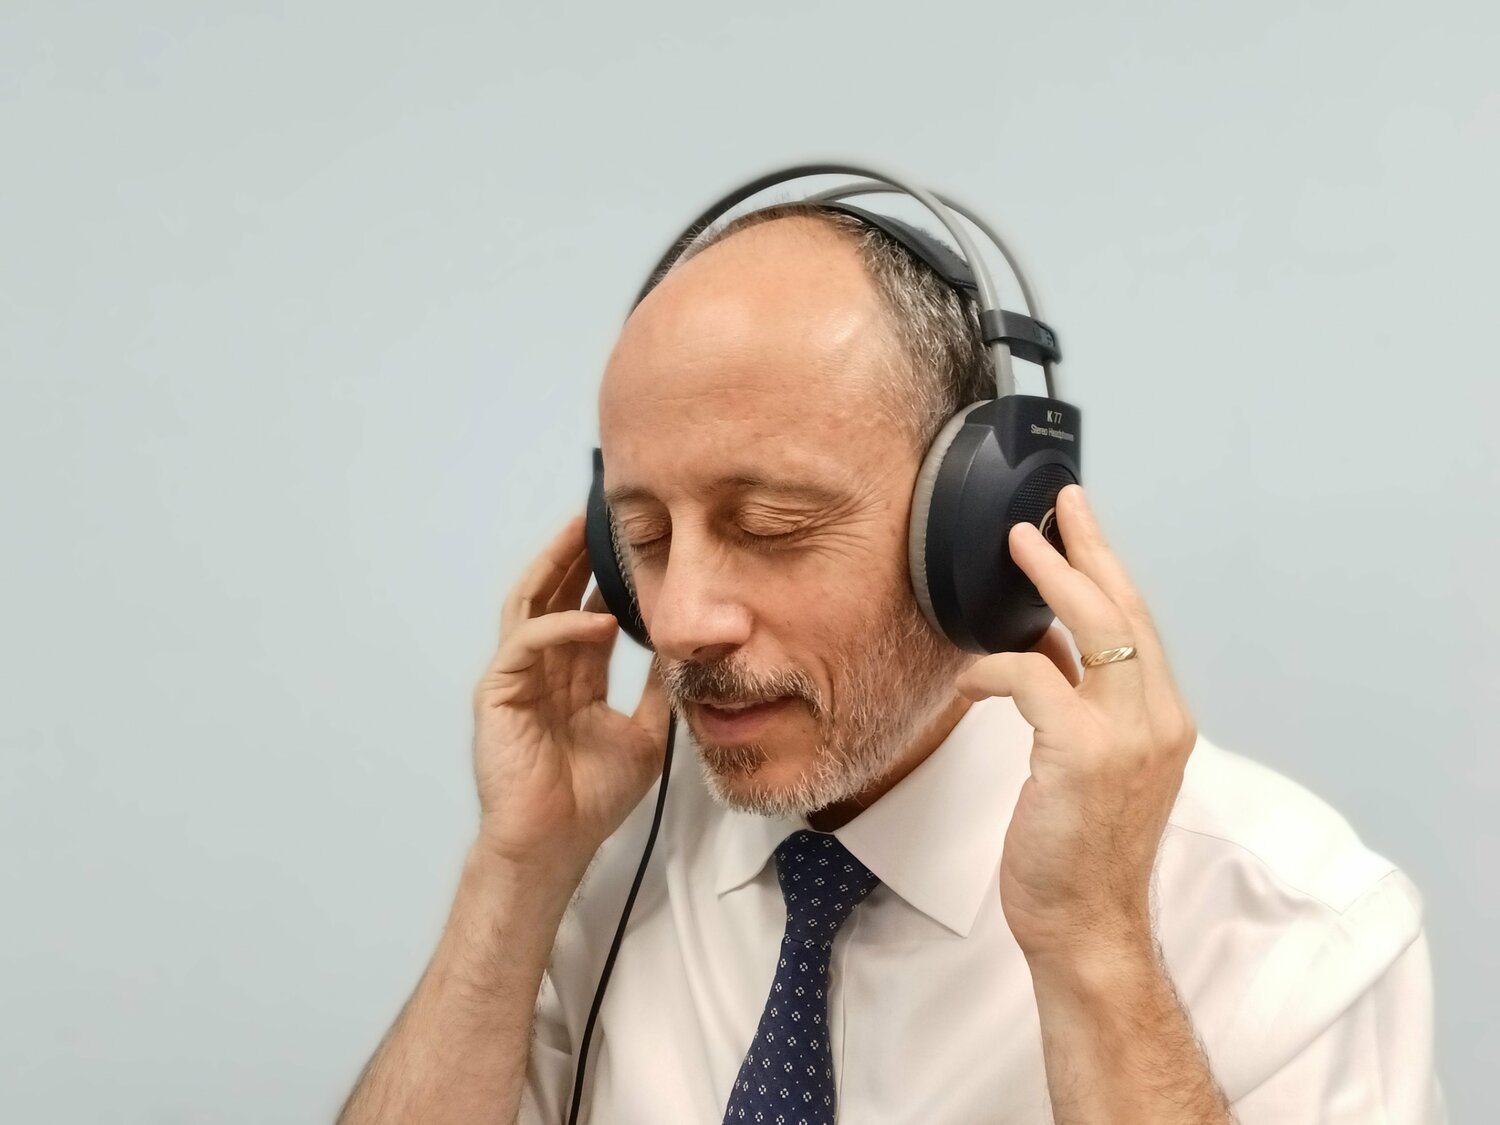 Dr. Larry Cardano, an audiologist from the Hearing Center of Long Island, has devoted his life to improving the lives of his patients by improving their hearing and in turn curbing its associated risk factors for other illnesses.